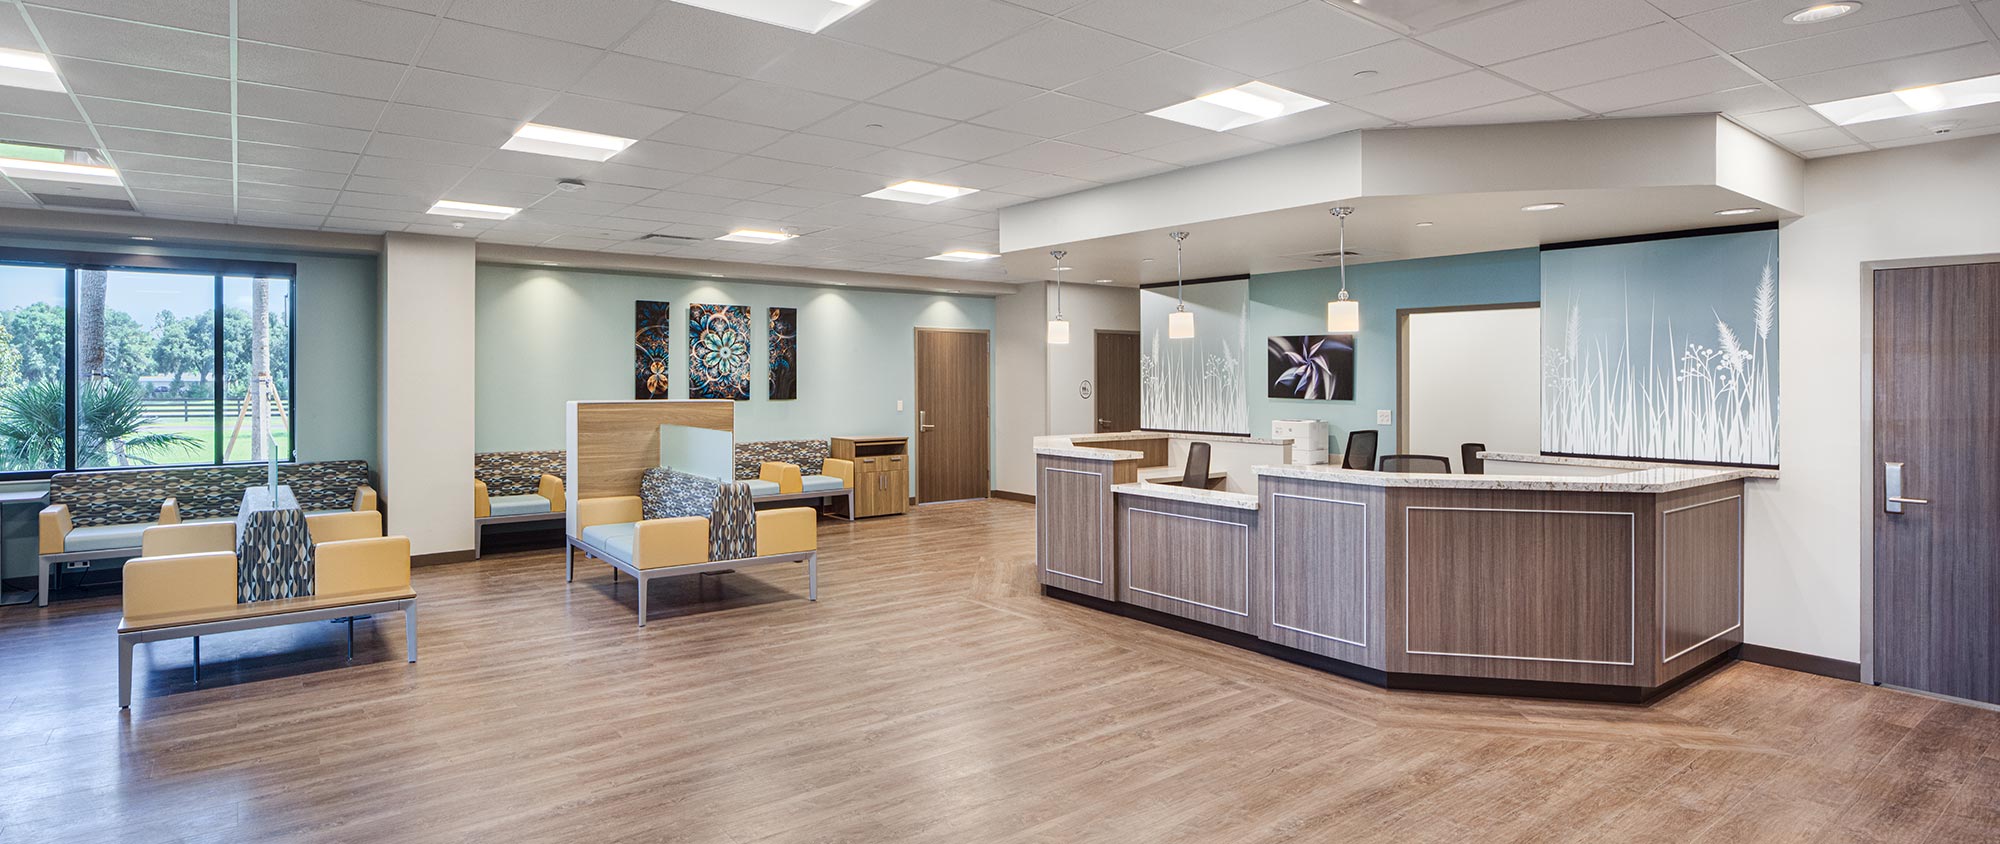 Center for Advanced Healthcare at Brownwood